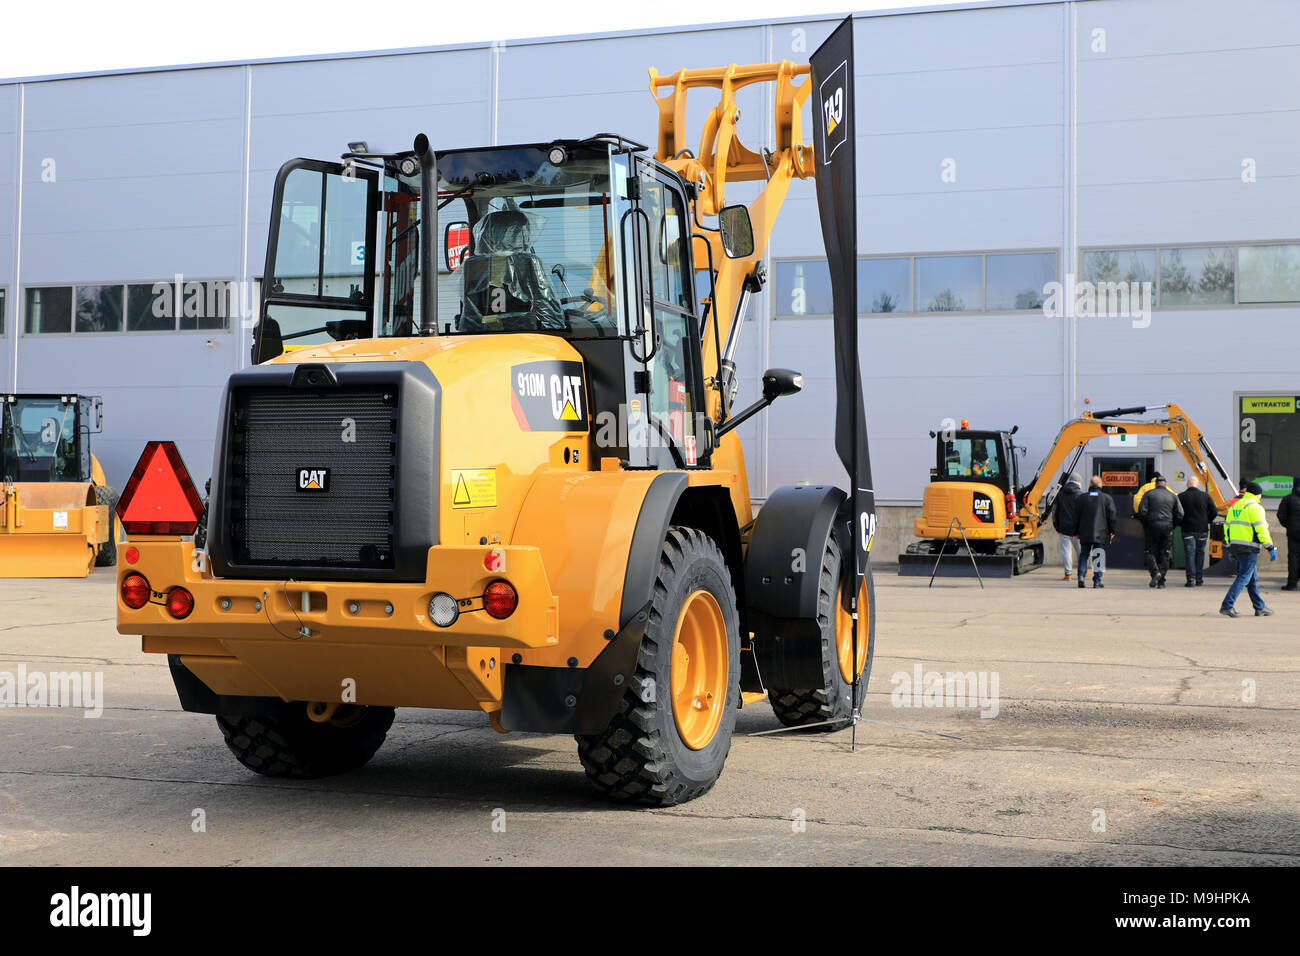 LIETO, FINLAND - MARCH 24, 2018: Cat 910 M compact wheel loader and other Cat equipment at the annual public event of Konekaupan Villi Lansi Machinery Stock Photo